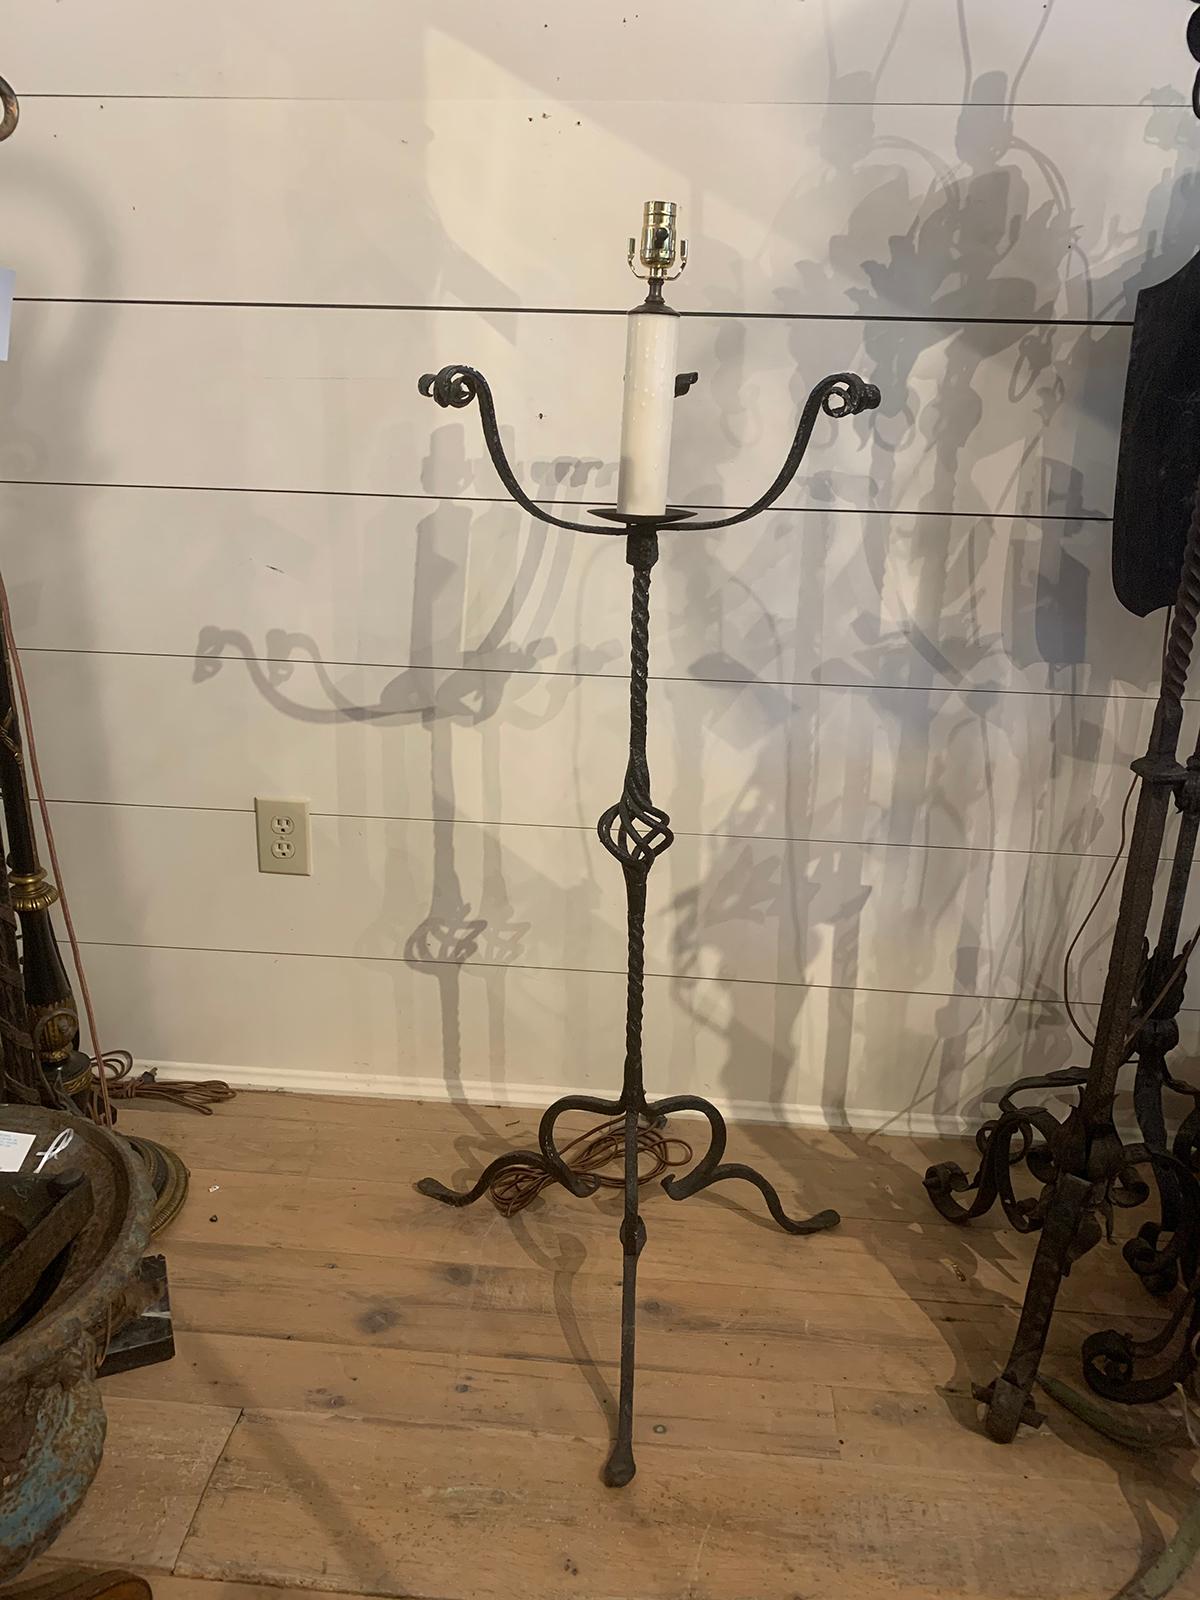 Early 20th century hand wrought iron torchère as floor lamp
Measures: 24